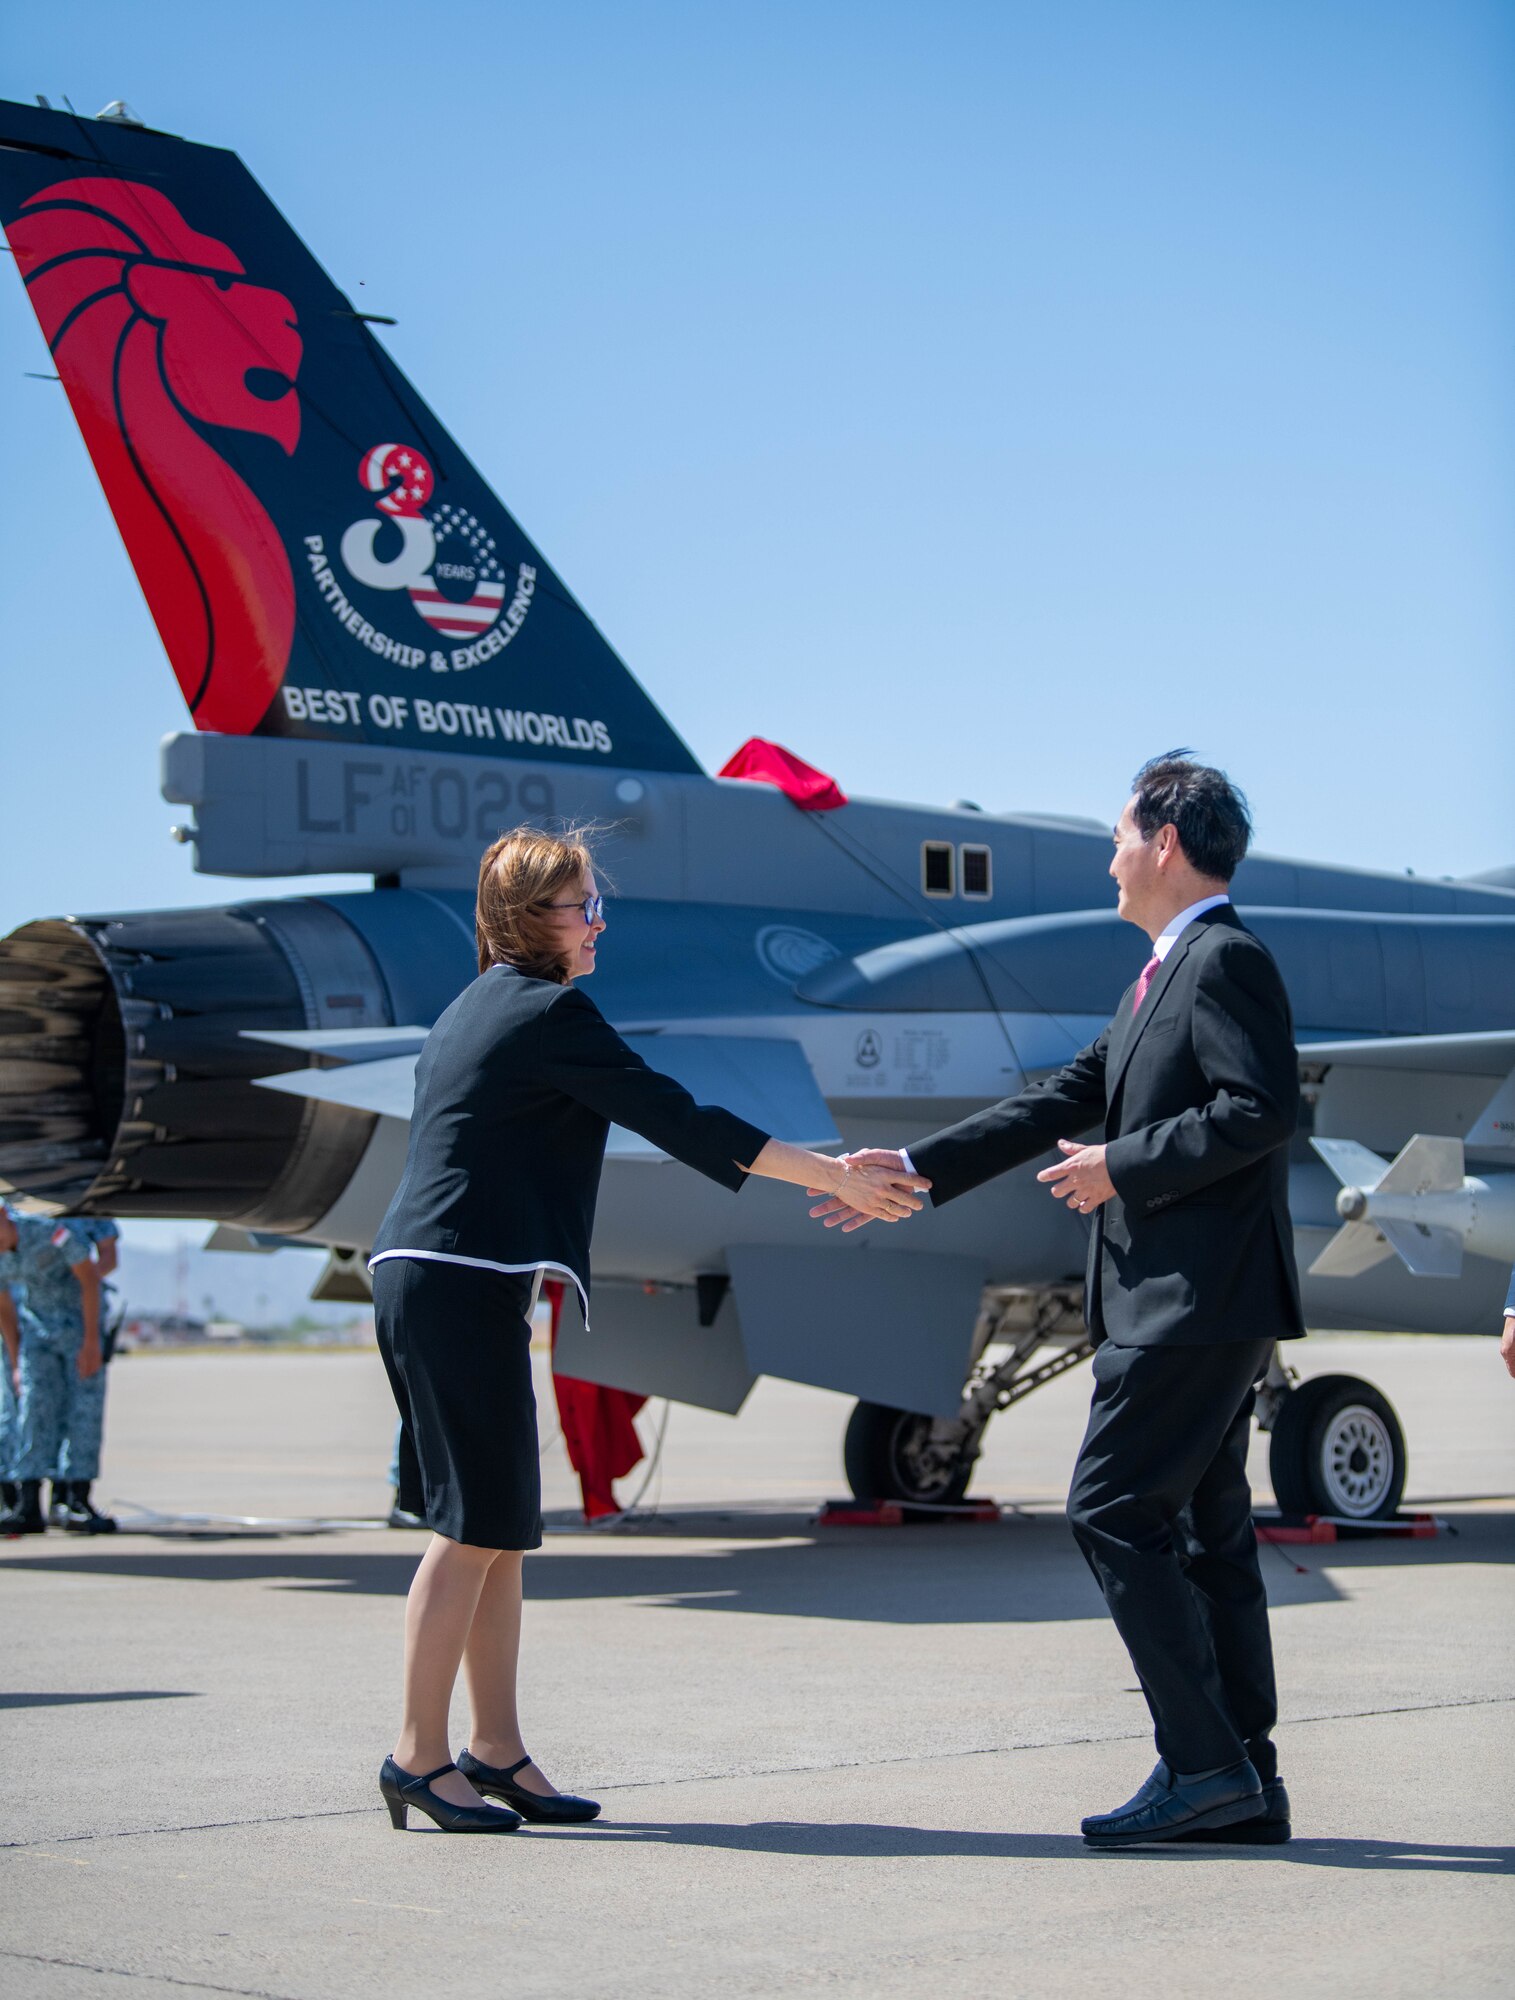 Kelli Seybolt (left), U.S. Air Force International Affairs Deputy Under Secretary, and Heng Chee How (right), Republic of Singapore Senior Minister of State, shake hands in front of a Republic of Singapore Air Force F-16 Fighting Falcon heritage jet during the RSAF Peace Carvin II 30th Anniversary celebration event, April 25, 2023, at Luke Air Force Base, Arizona.